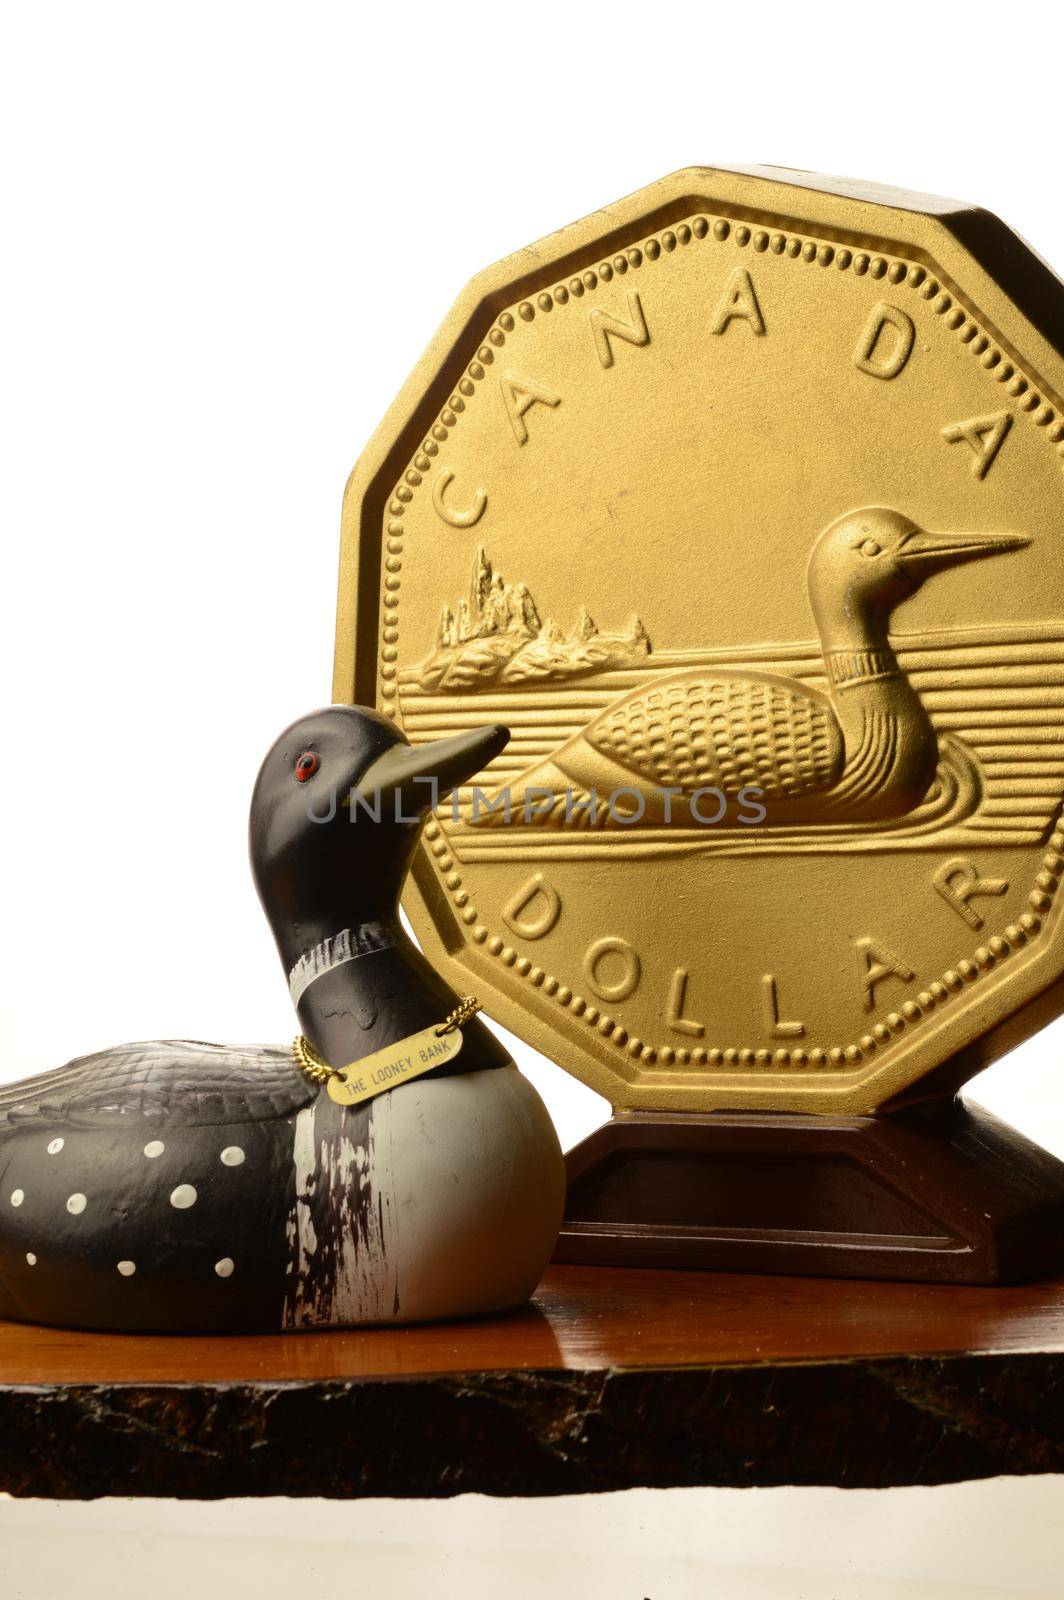 A focused theme on the Canadian Dollar currency with a Loonie coin used in the everyday money supply.